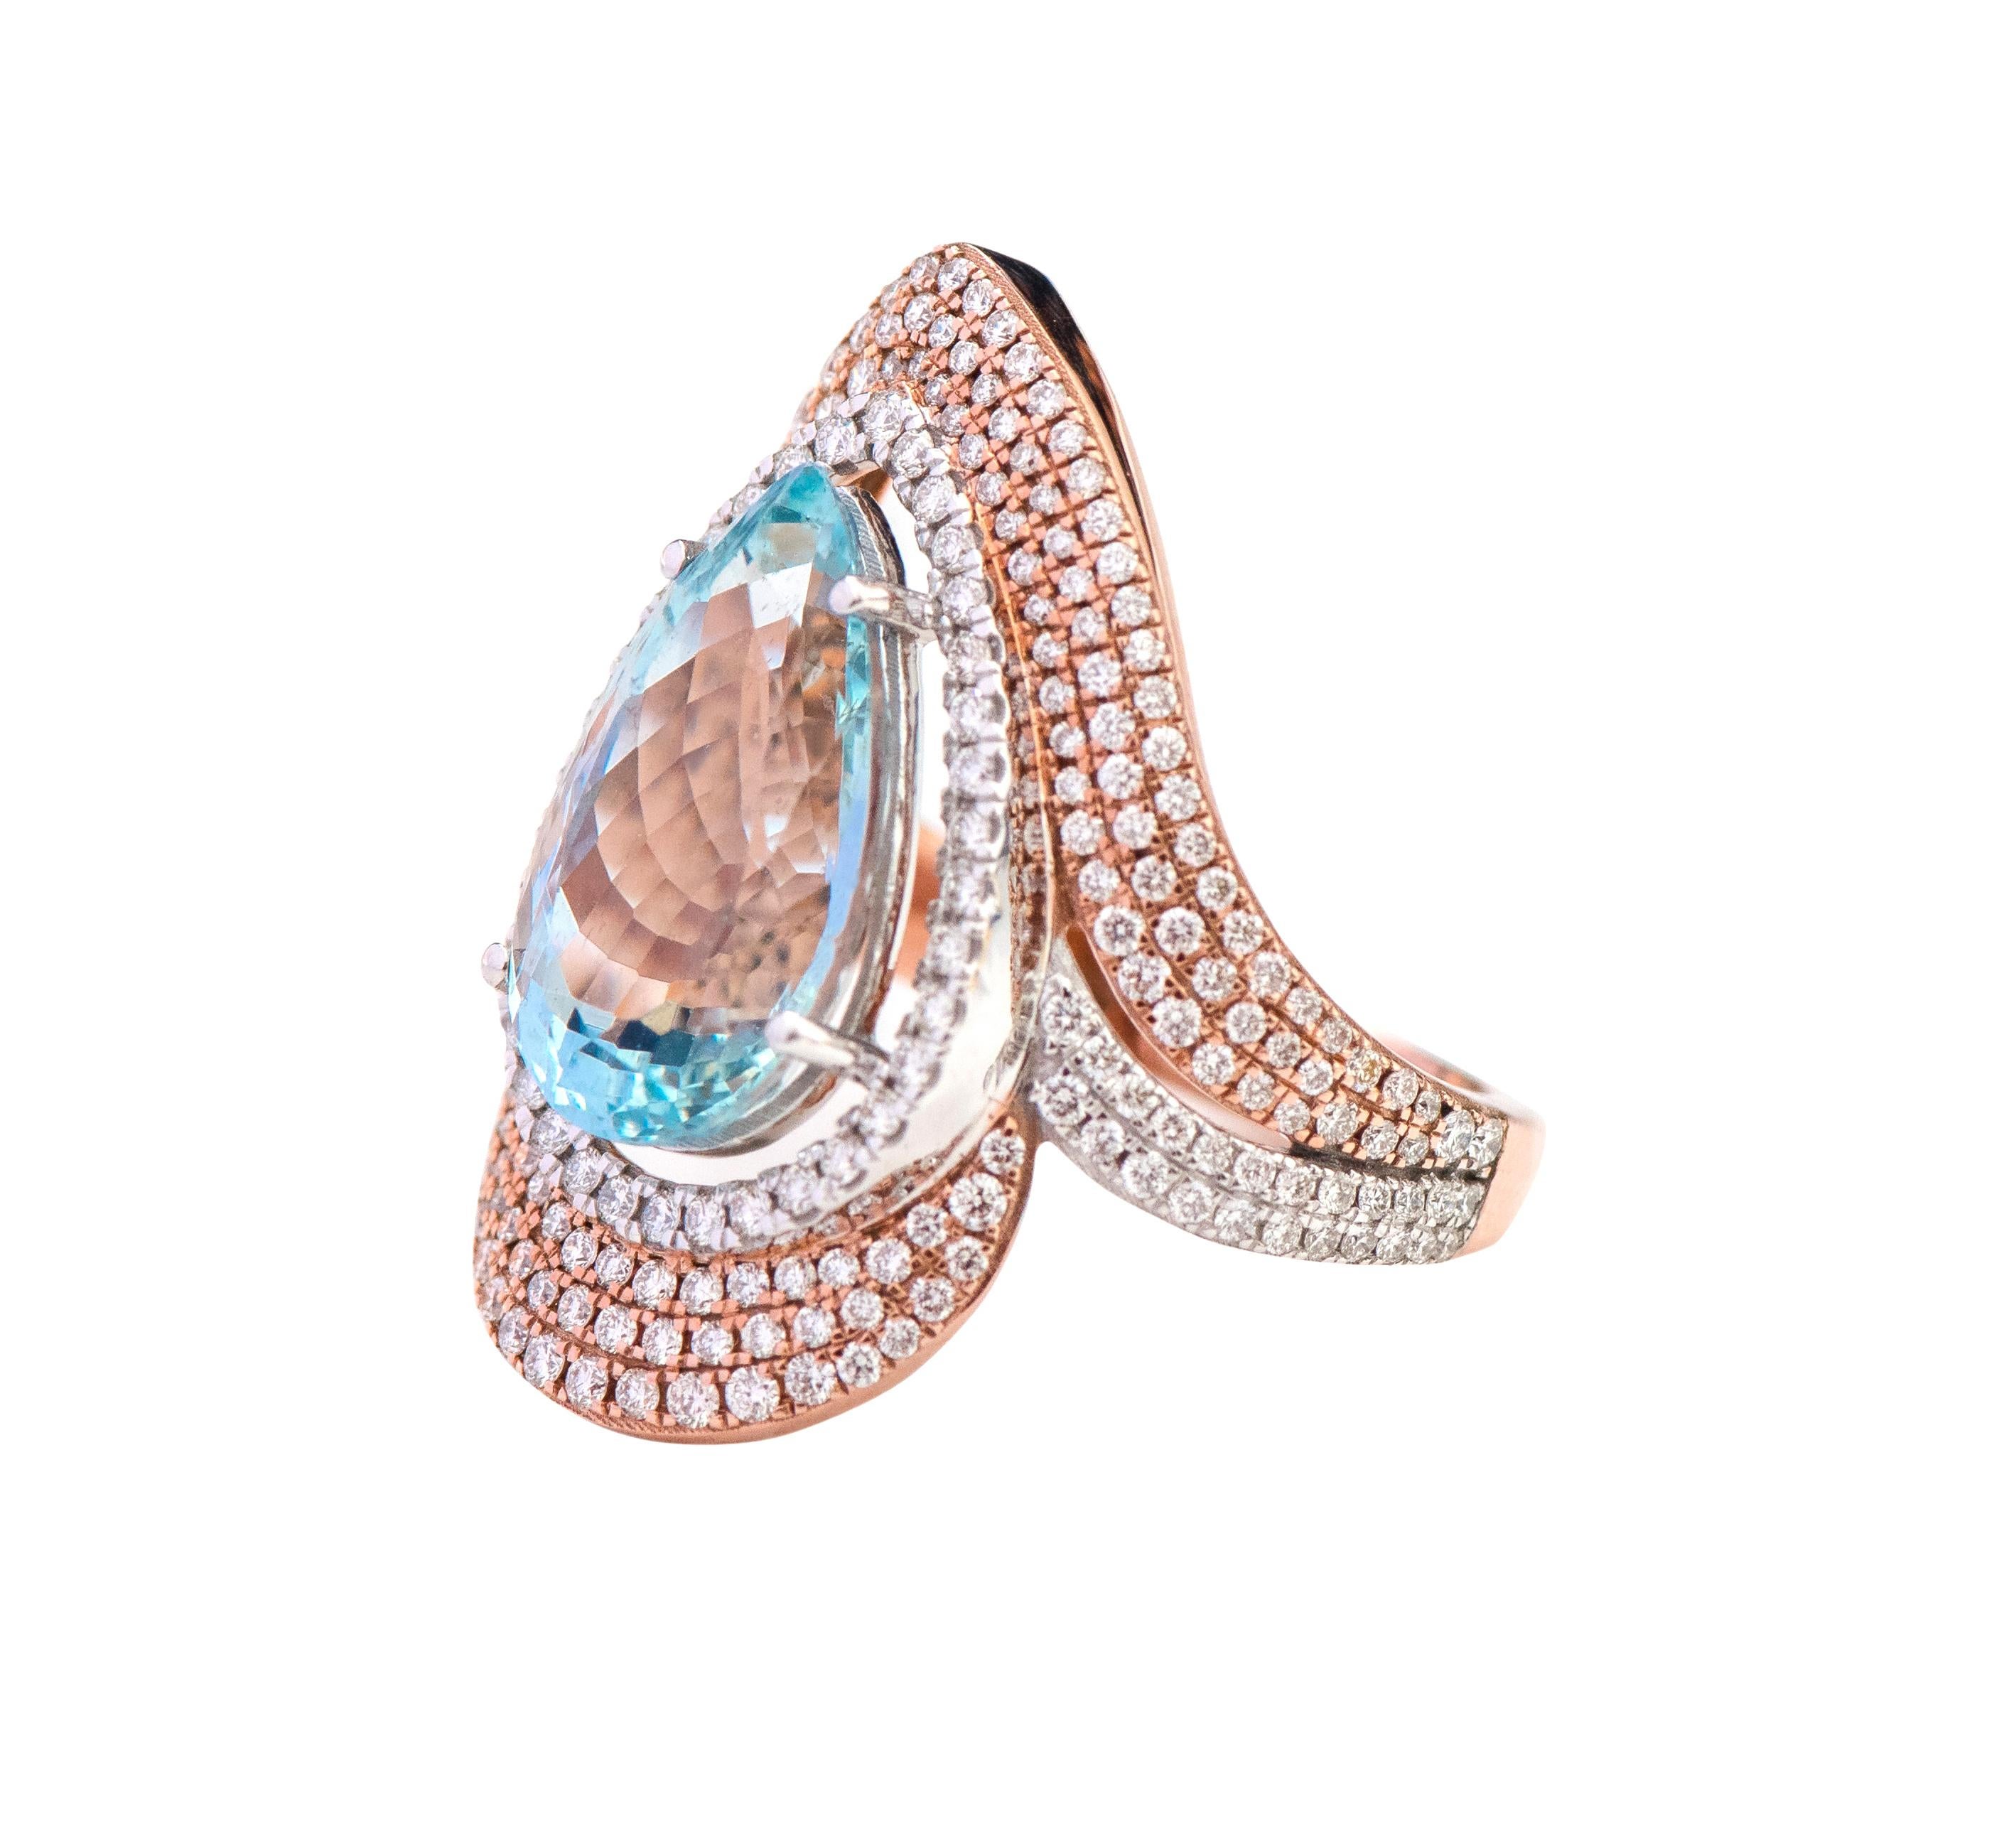 18 Karat Gold 5.15 Carat Pear-Cut Aquamarine and Diamond Cocktail Statement Ring

This sensational Santa maria aquamarine and diamond cluster broad cocktail ring is extraordinary. The design concept of the curvature flow on the ring is intriguingly